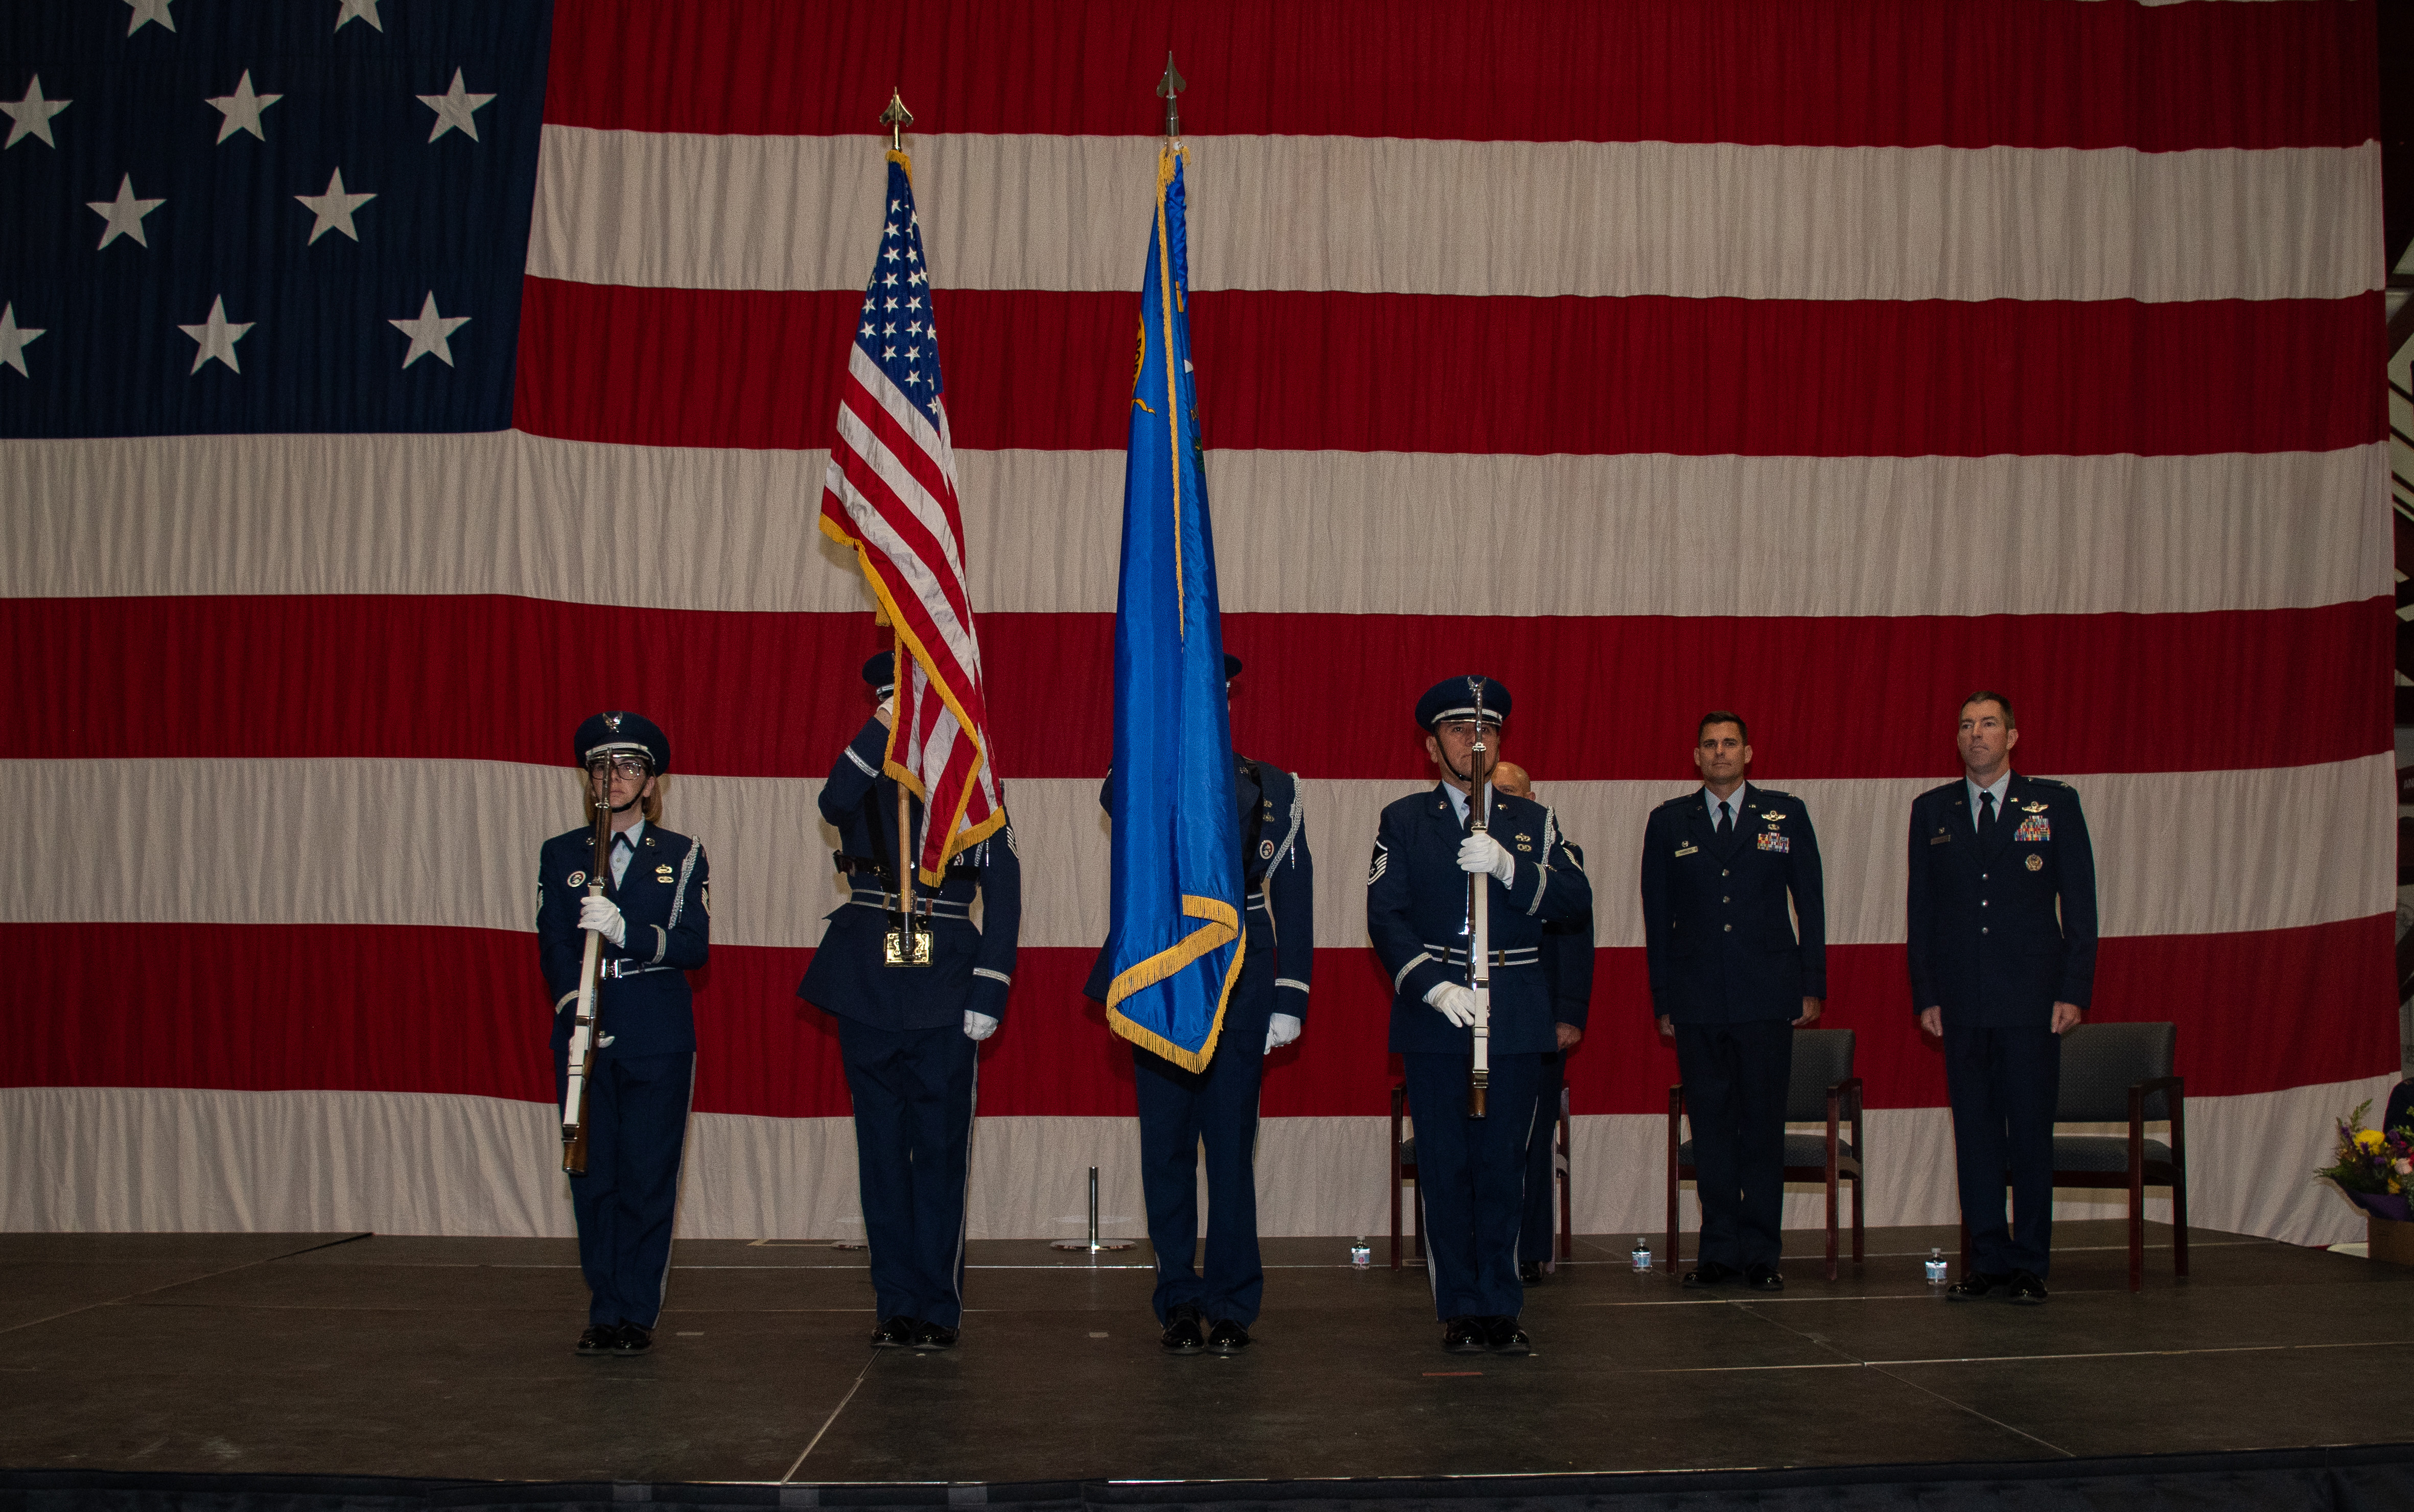 Members of the Nevada Air National Guard Honor Guard present the colors during the National Anthem during a change of command ceremony at the Nevada Air National Guard Base.